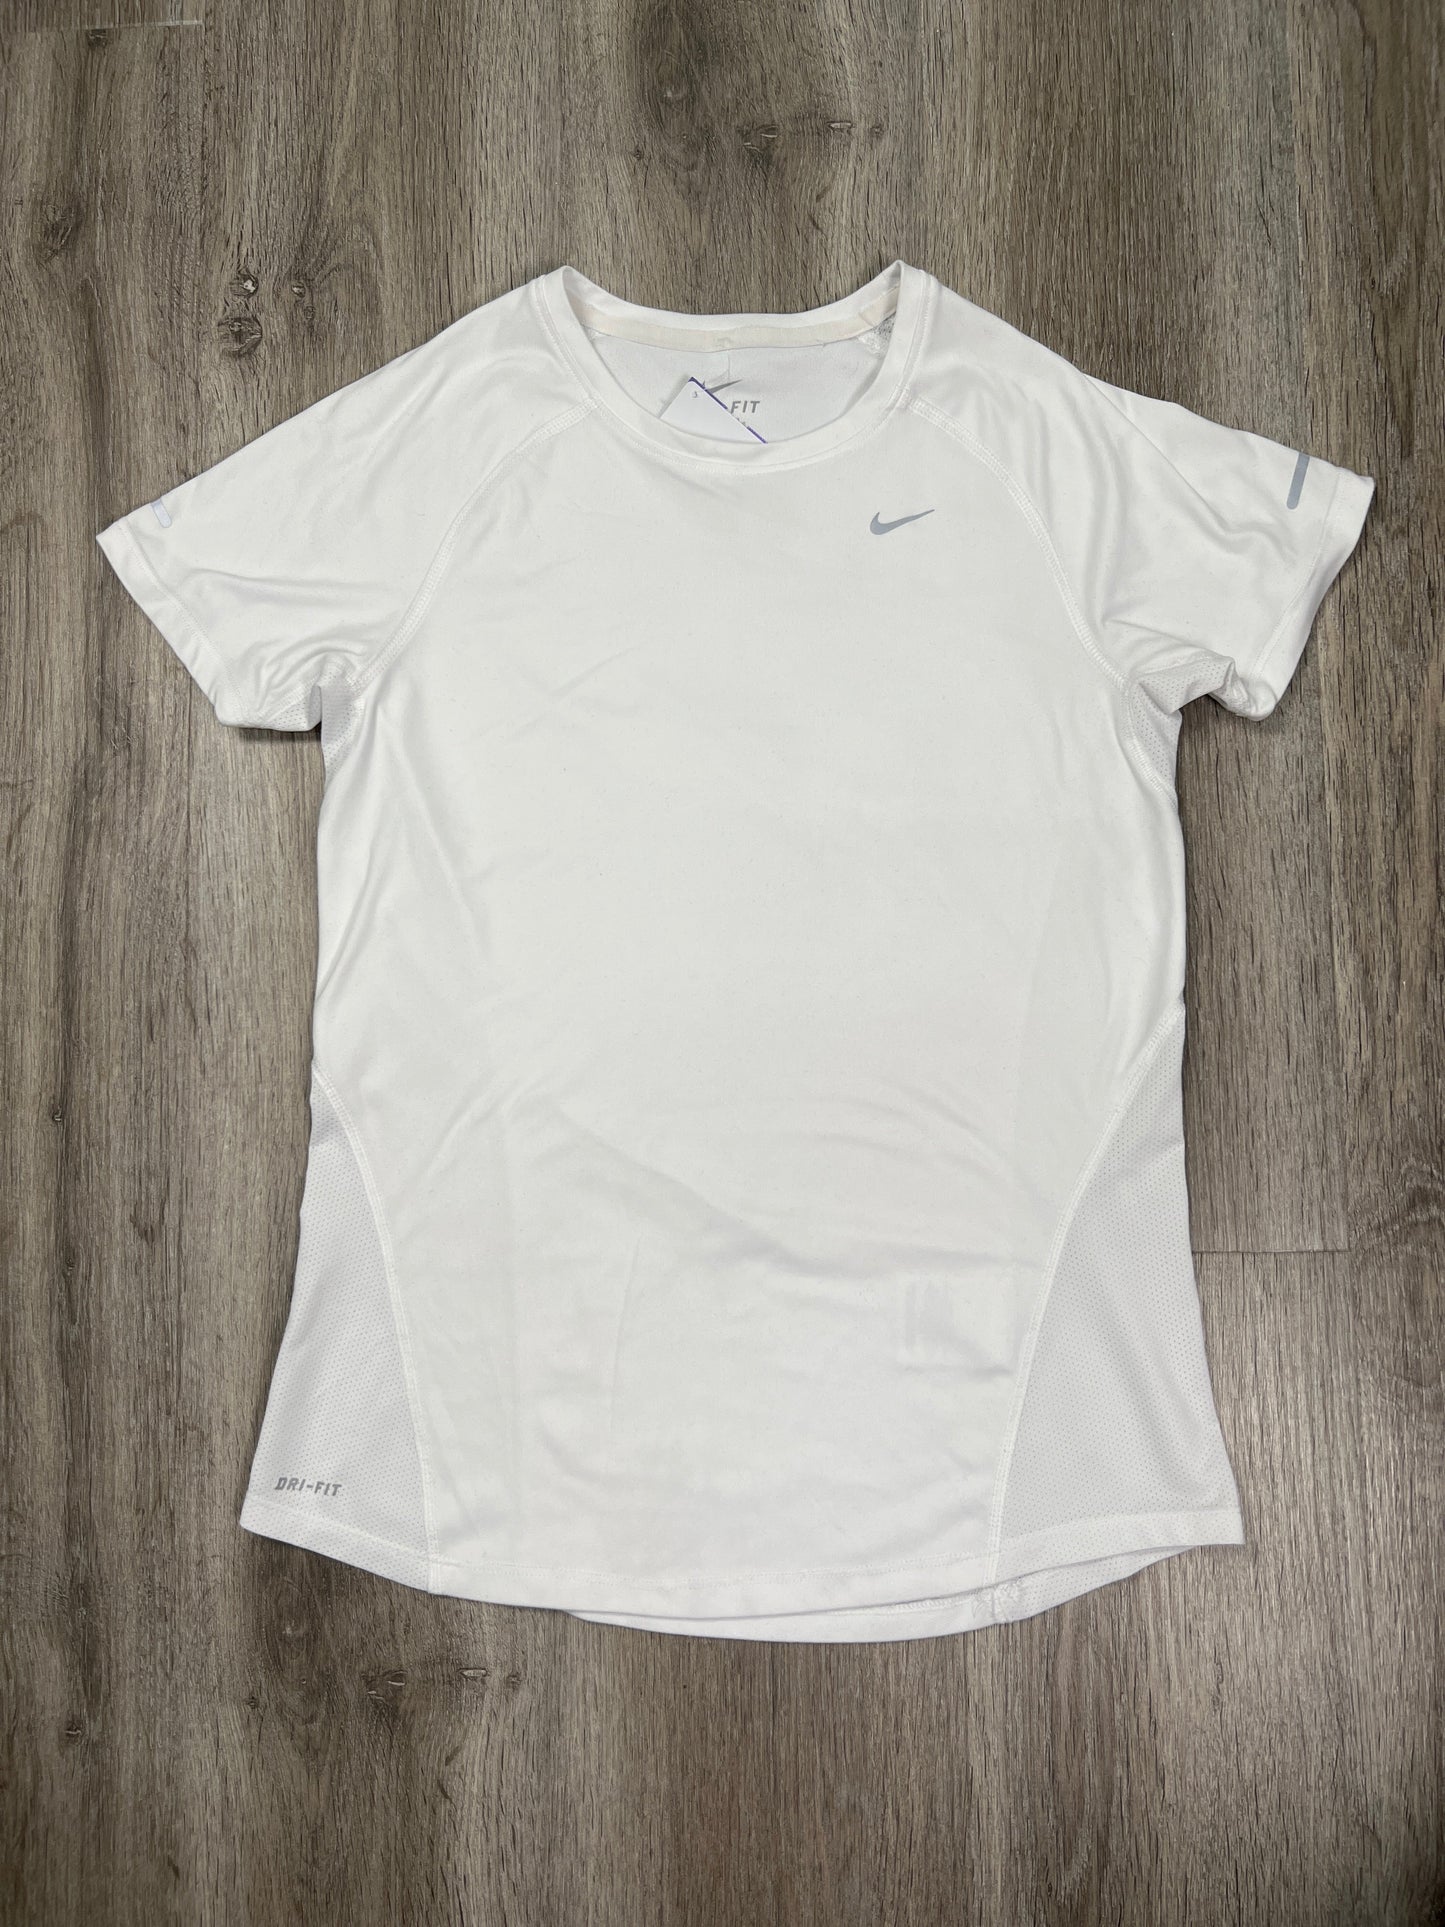 White Athletic Top Short Sleeve Nike Apparel, Size S